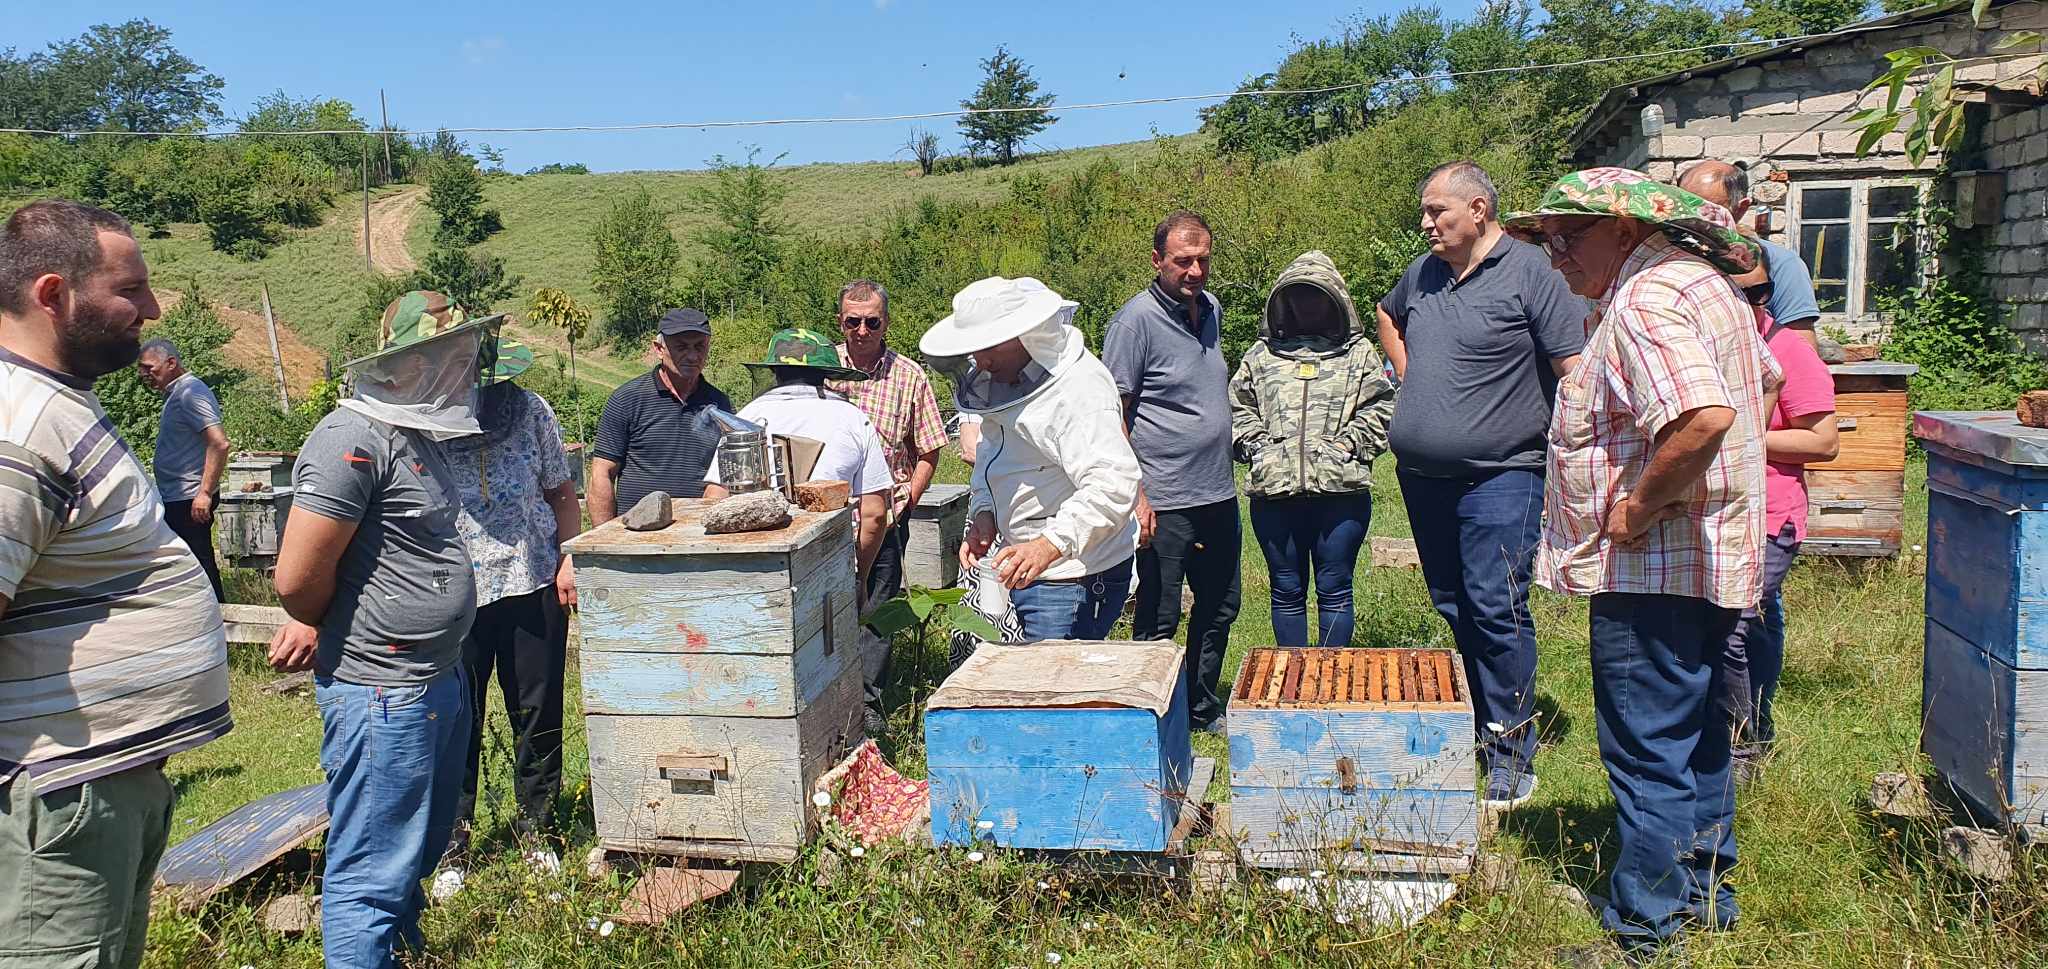 More than 900 beekeepers were trained throughout the country